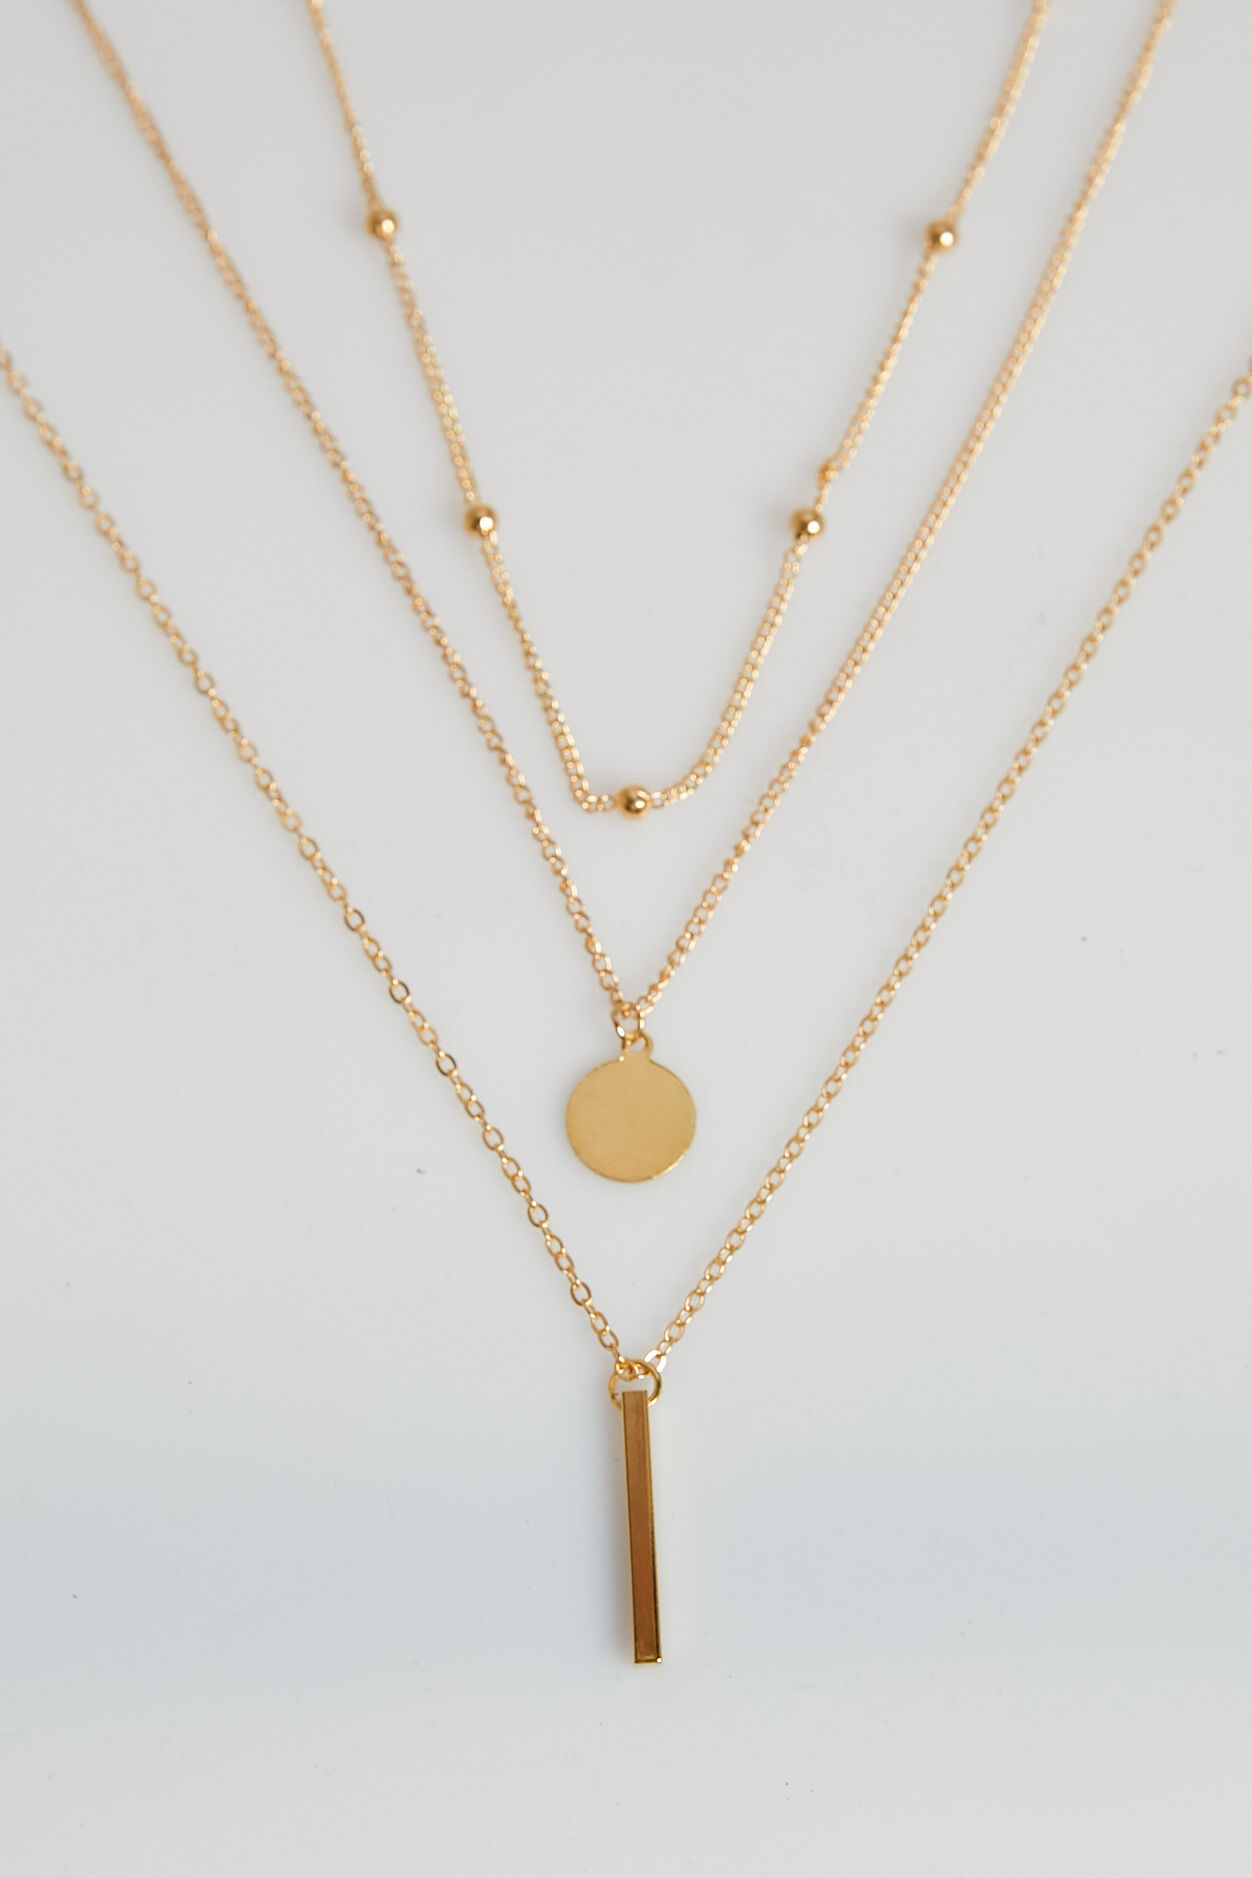 The Guest List Layered Necklace Set in Gold | Showpo USA